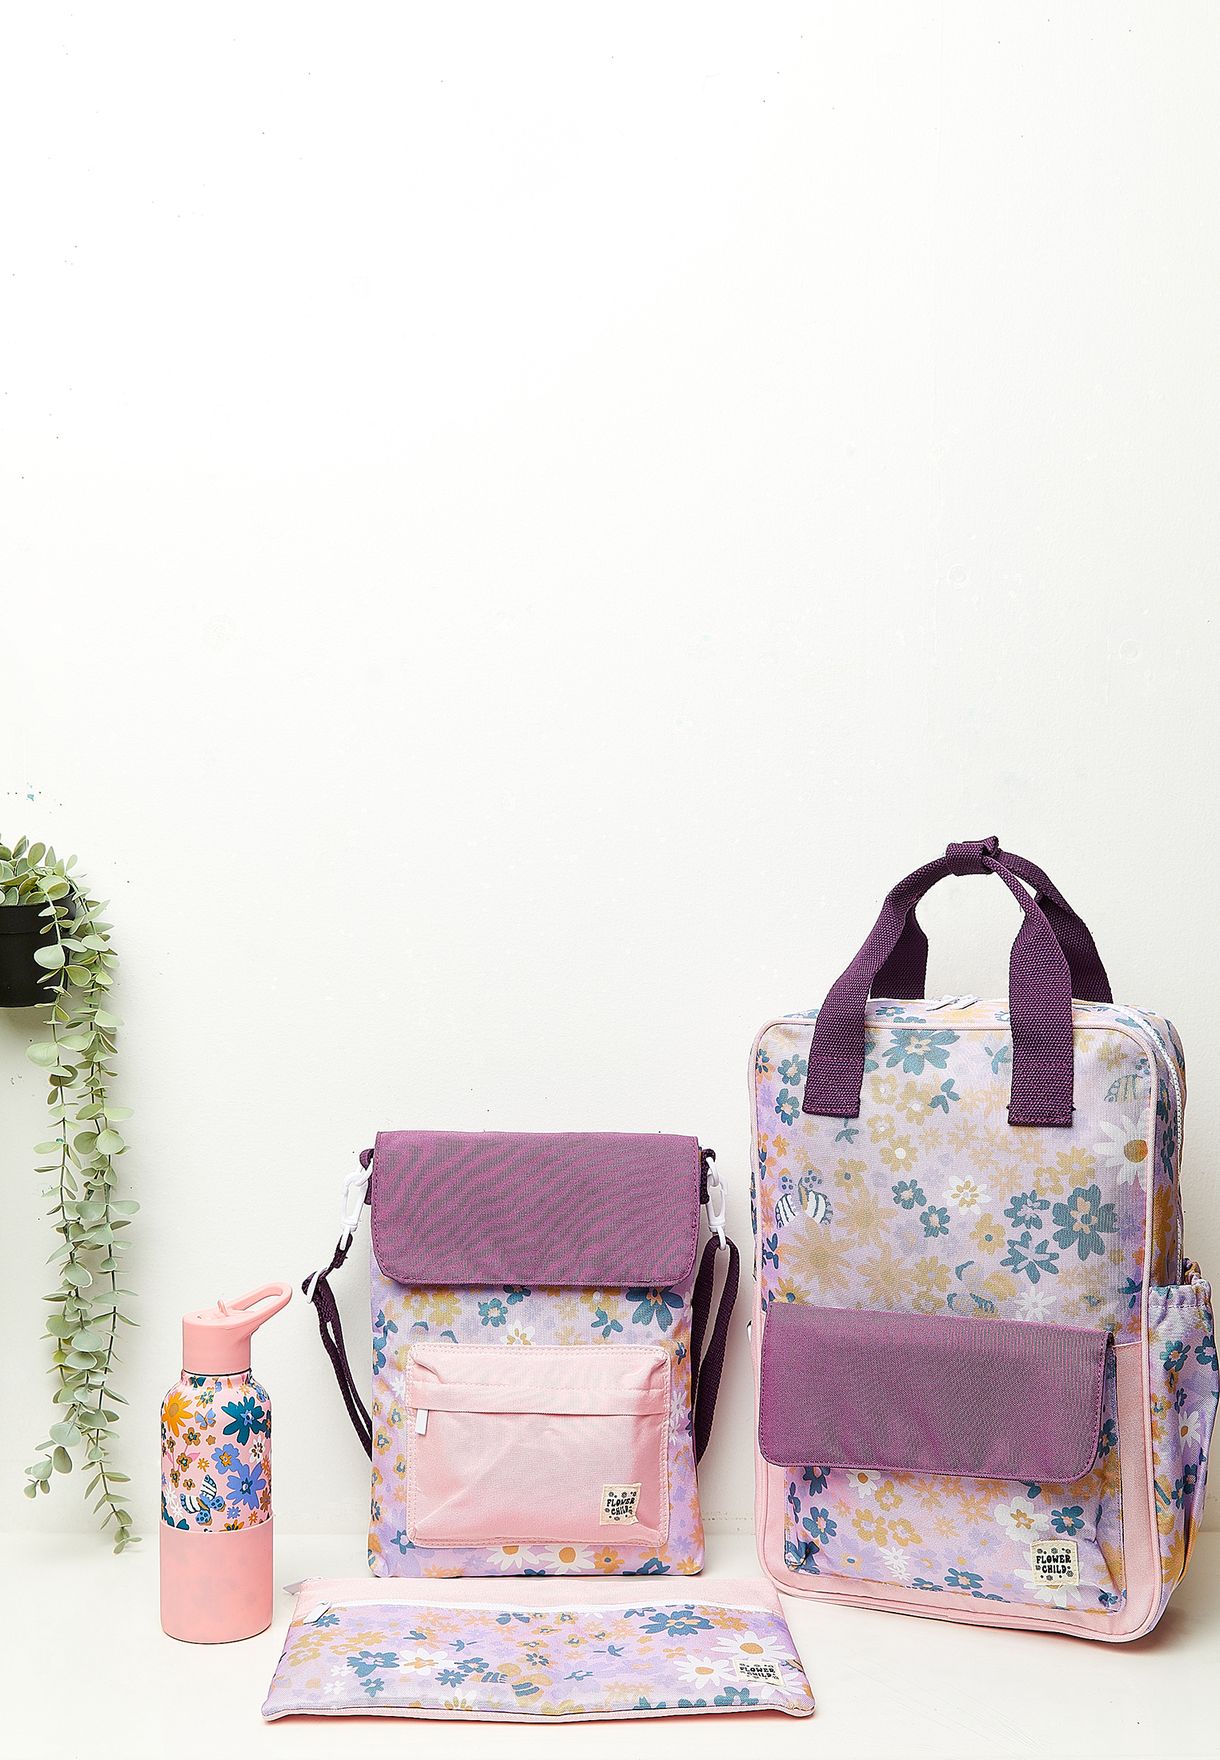 Back To School Kit Worth 396Aed - Floral Paradise